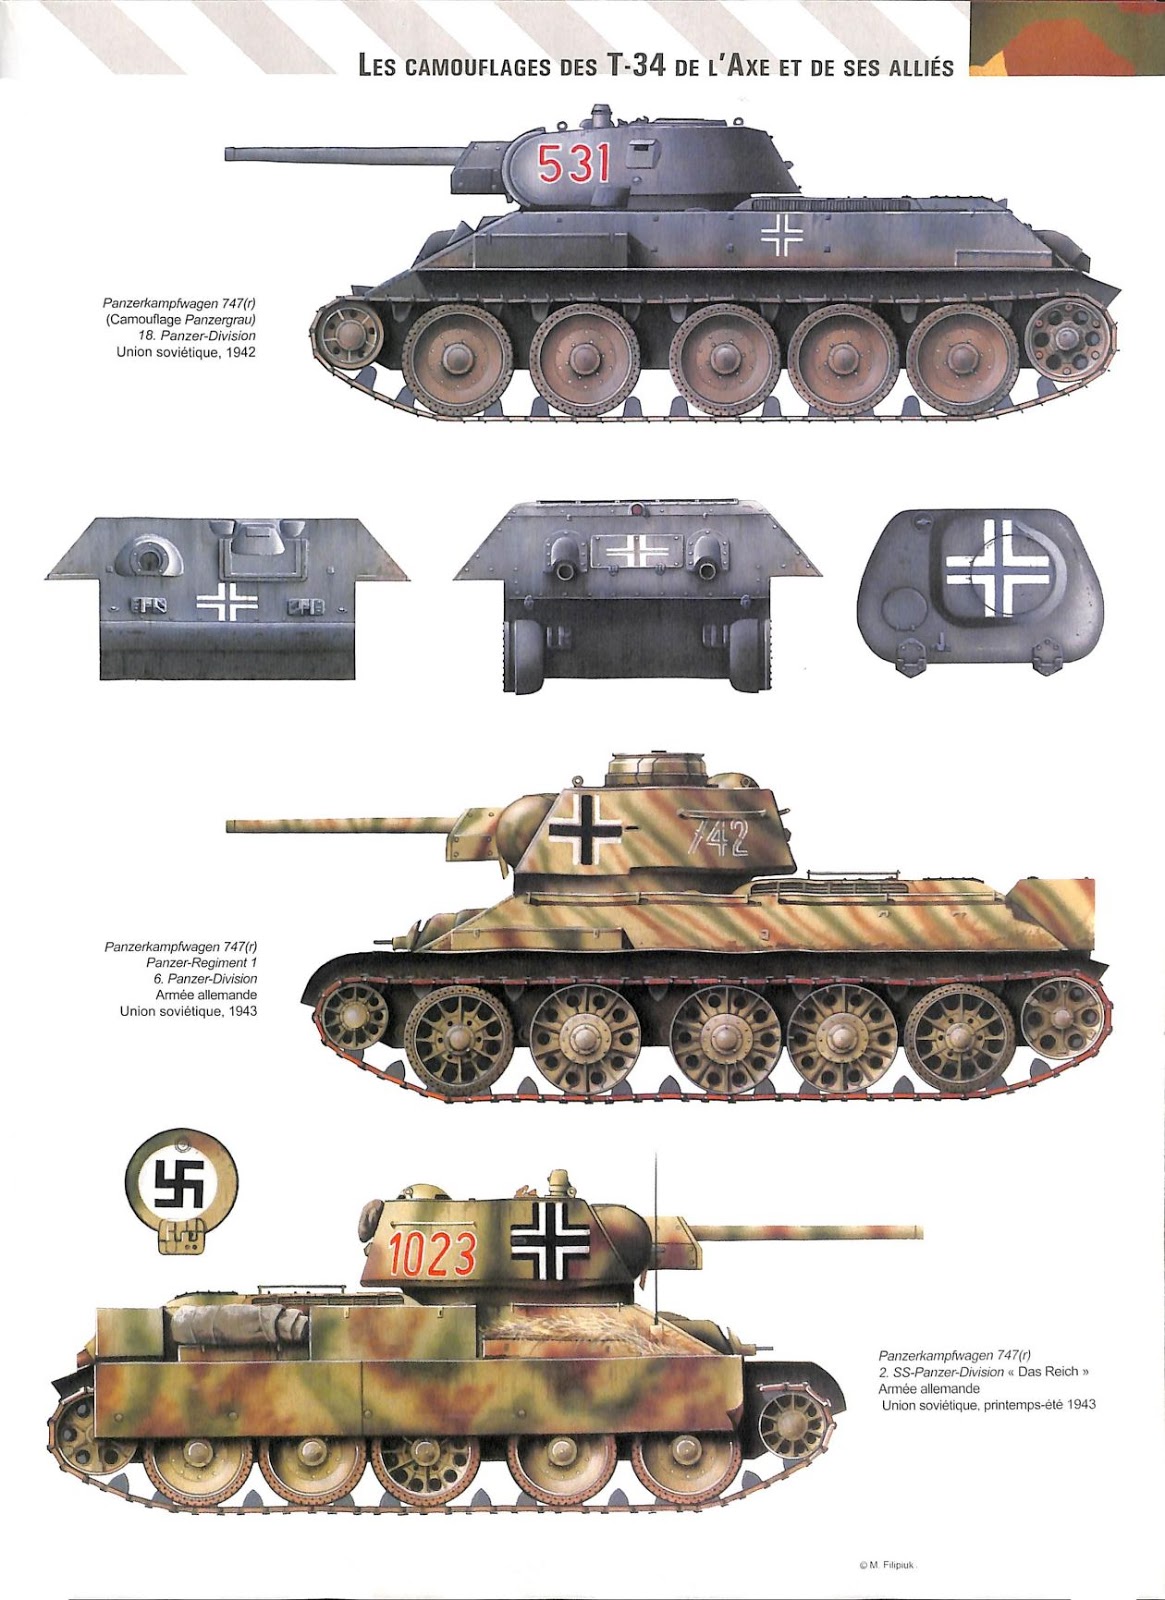 Axis Tanks And Combat Vehicles Of World War Ii January 17